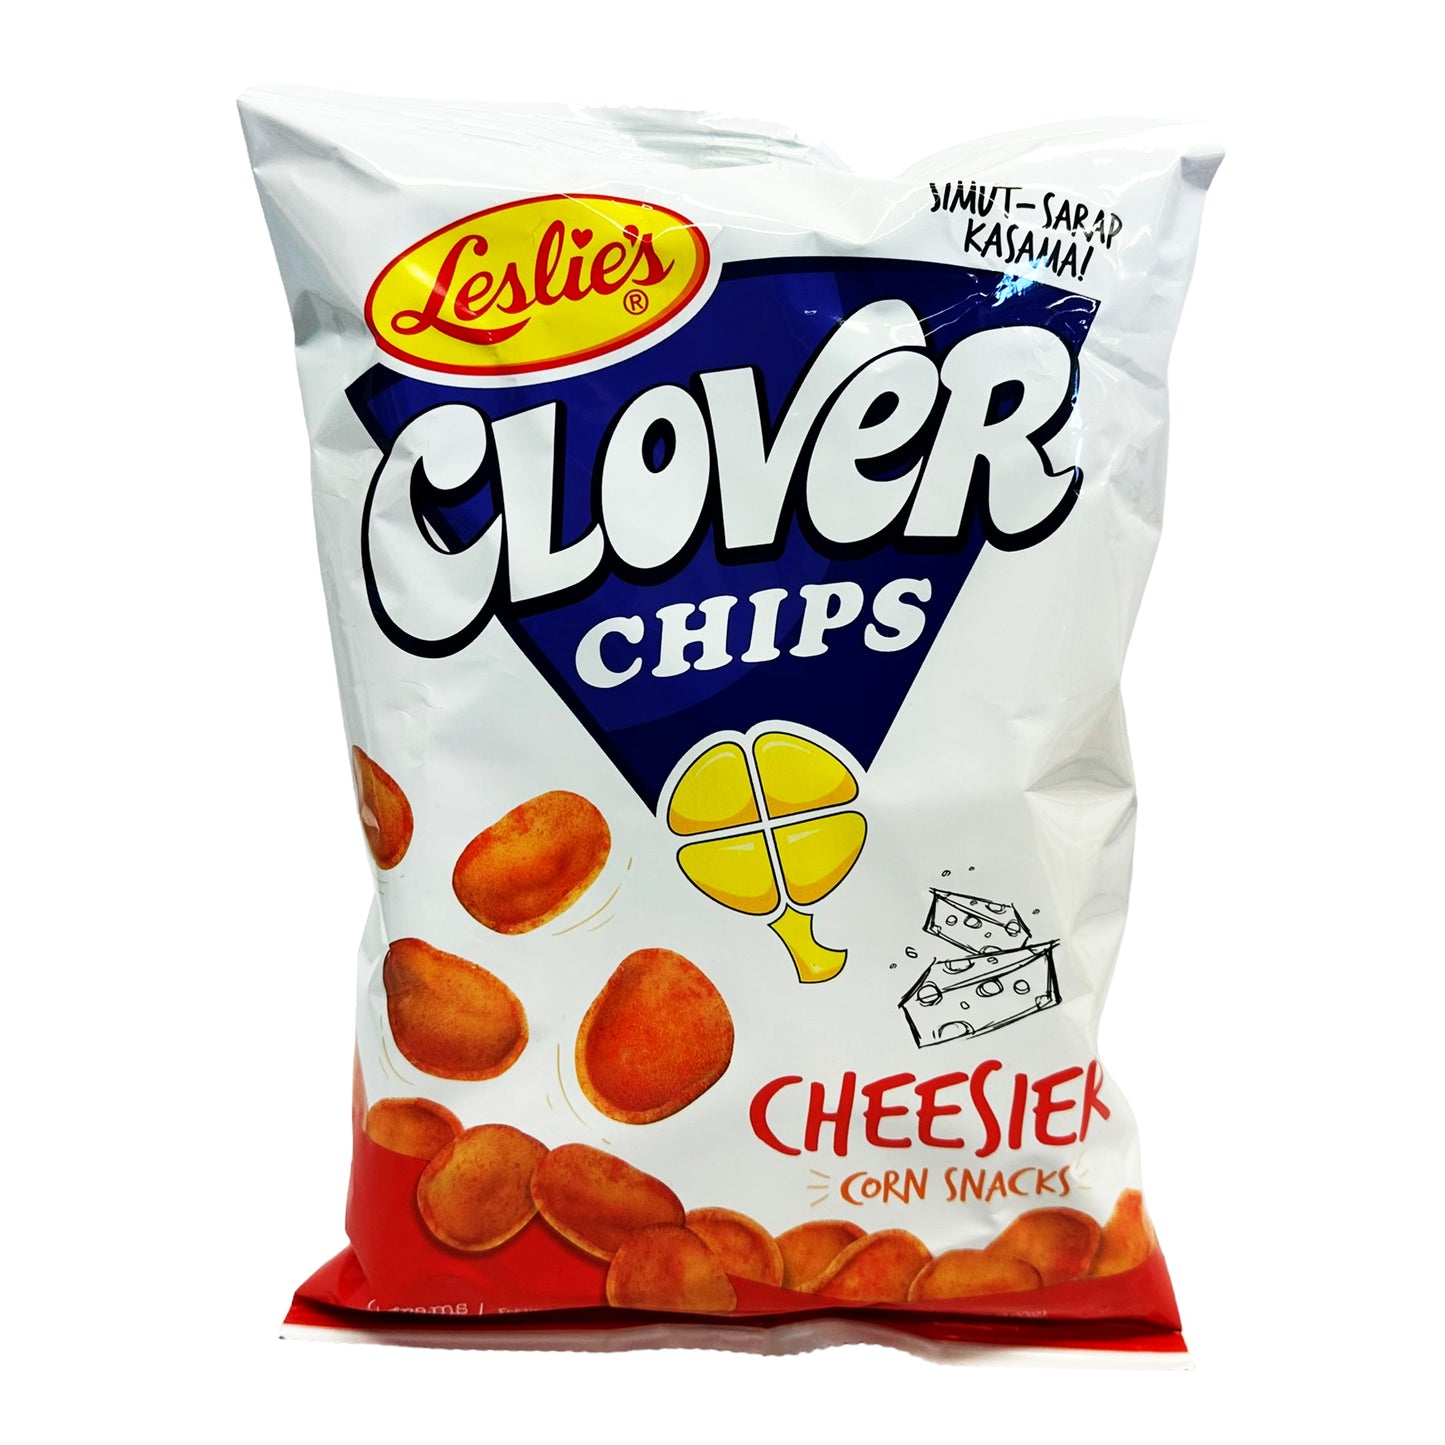 Front graphic image of Leslie's Clover Chips - Cheesier Flavor 3oz (85g)